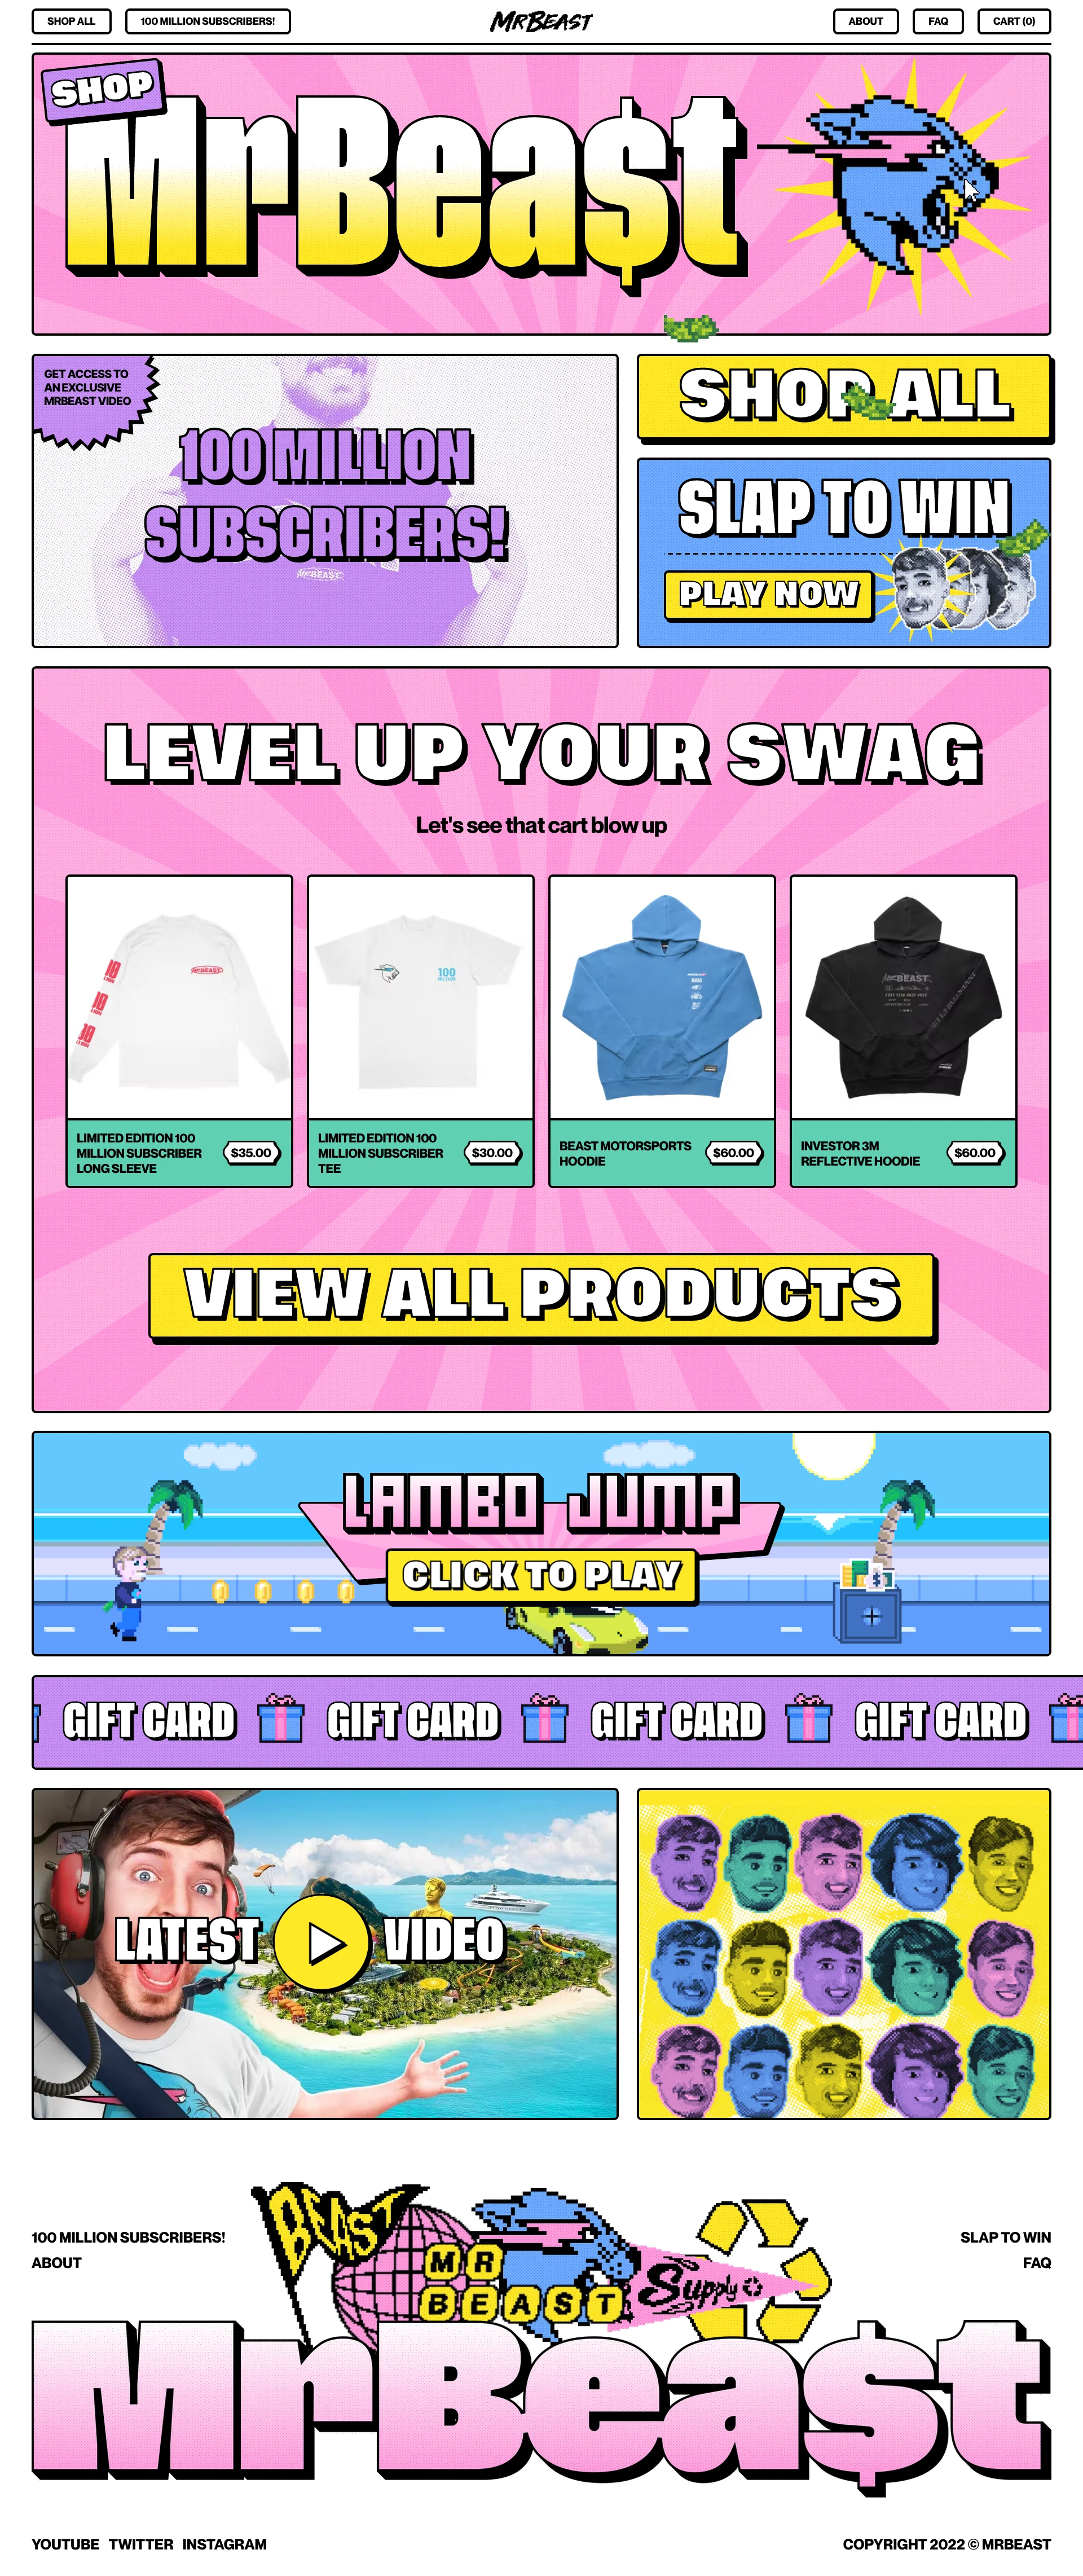 ShopMrBeast Landing Page Example: Jimmy Donaldson, more commonly known as MrBeast, is an American YouTuber from Greenville, North Carolina. He has been making videos for almost 10 years now, branching into all kinds of content. He has forged a YouTube legacy around his extreme stunt videos and overwhelming generosity.